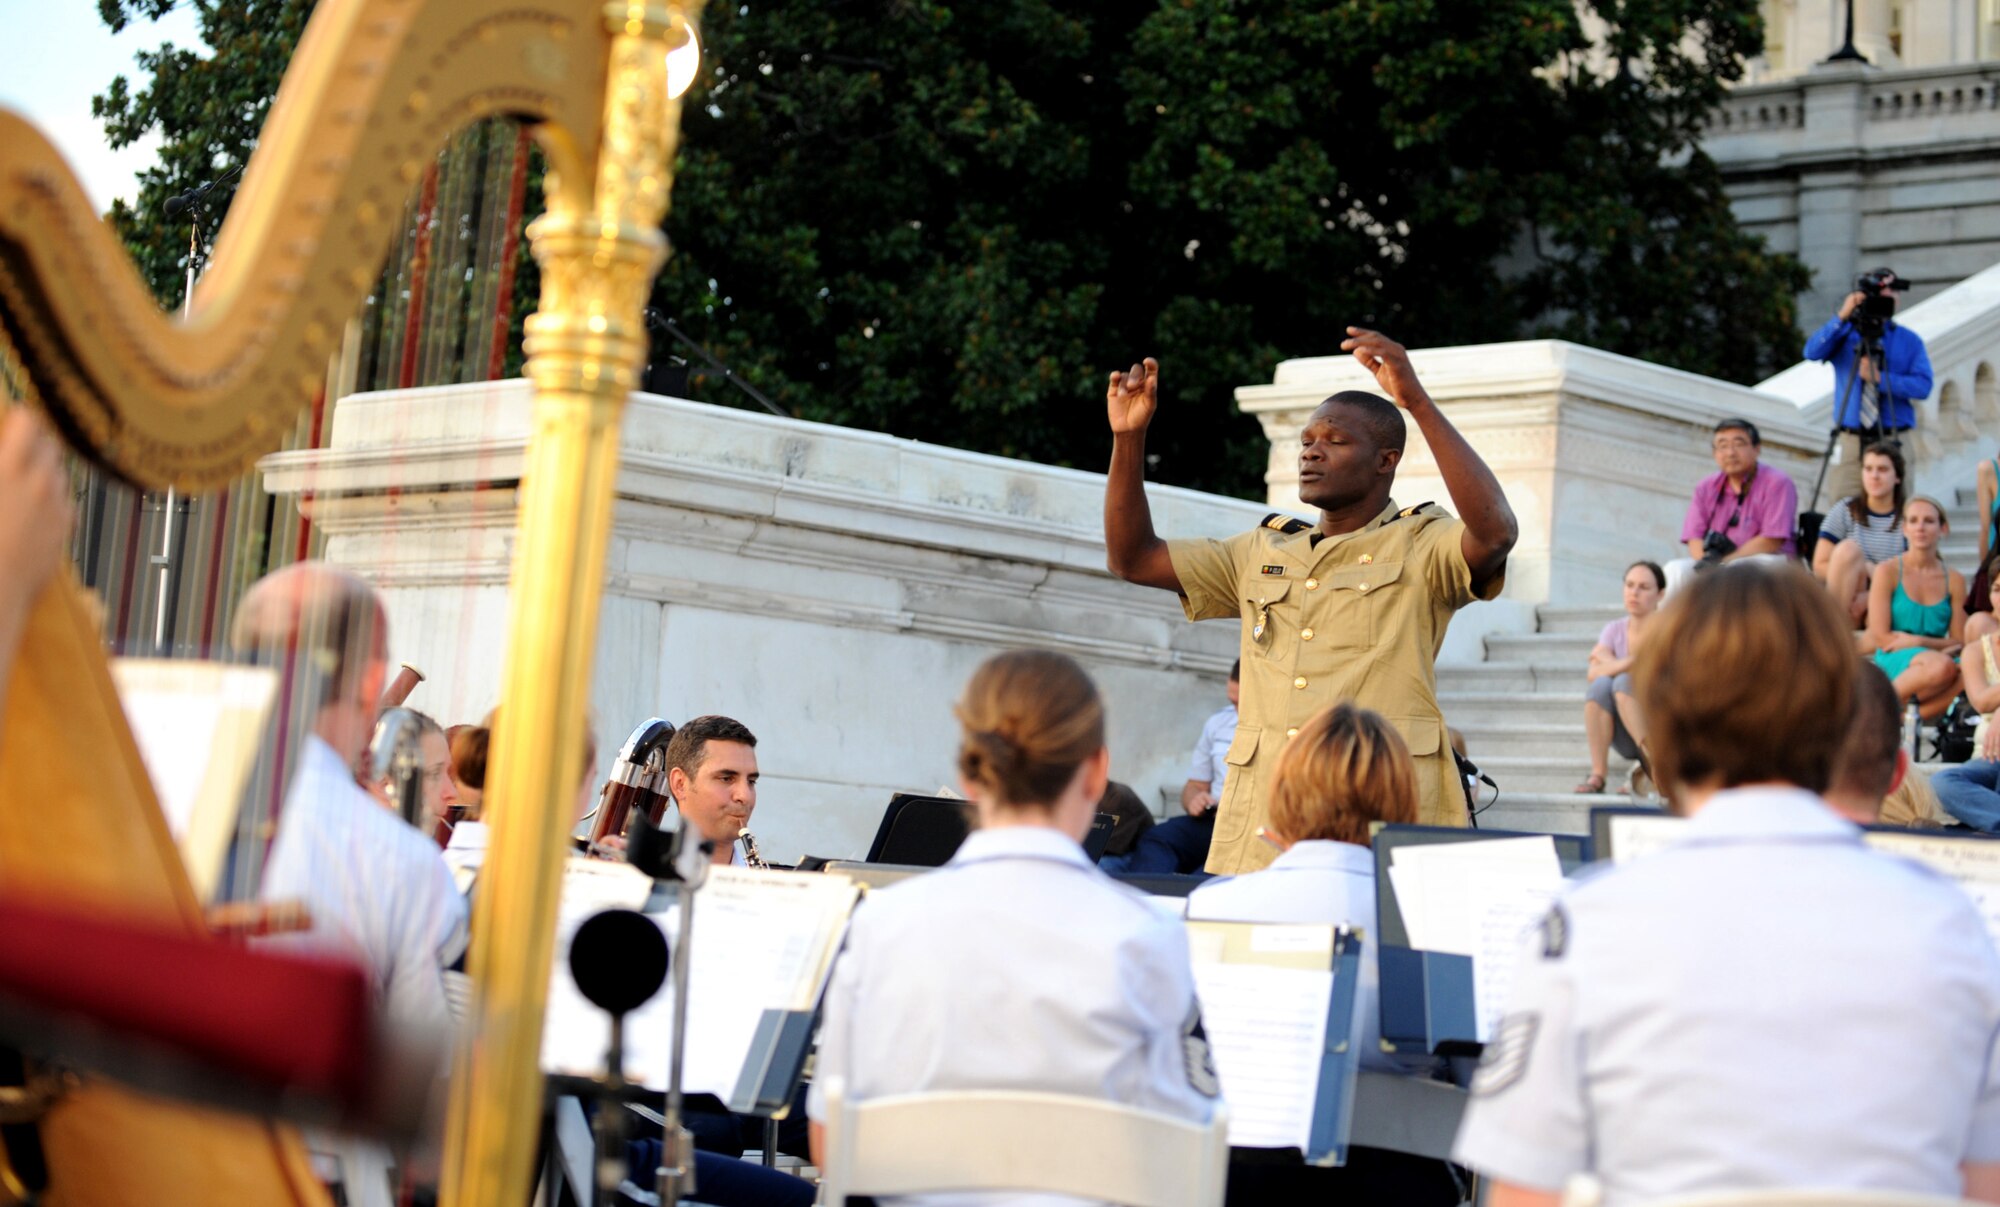 Capt Patrick Odjo, commander of the Music Squadron and Mobile Squadron for the National Gendarmerie in Benin, was a guest conductor for the U.S.Air Force Band as they played for bystanders on the steps of the U.S. Capitol building on July 24,2012 in Washington D.C. The  band hosts this concert every Tuesday from June 5-August 28. (Air Force photo by Senior Airman Christina Brownlow)